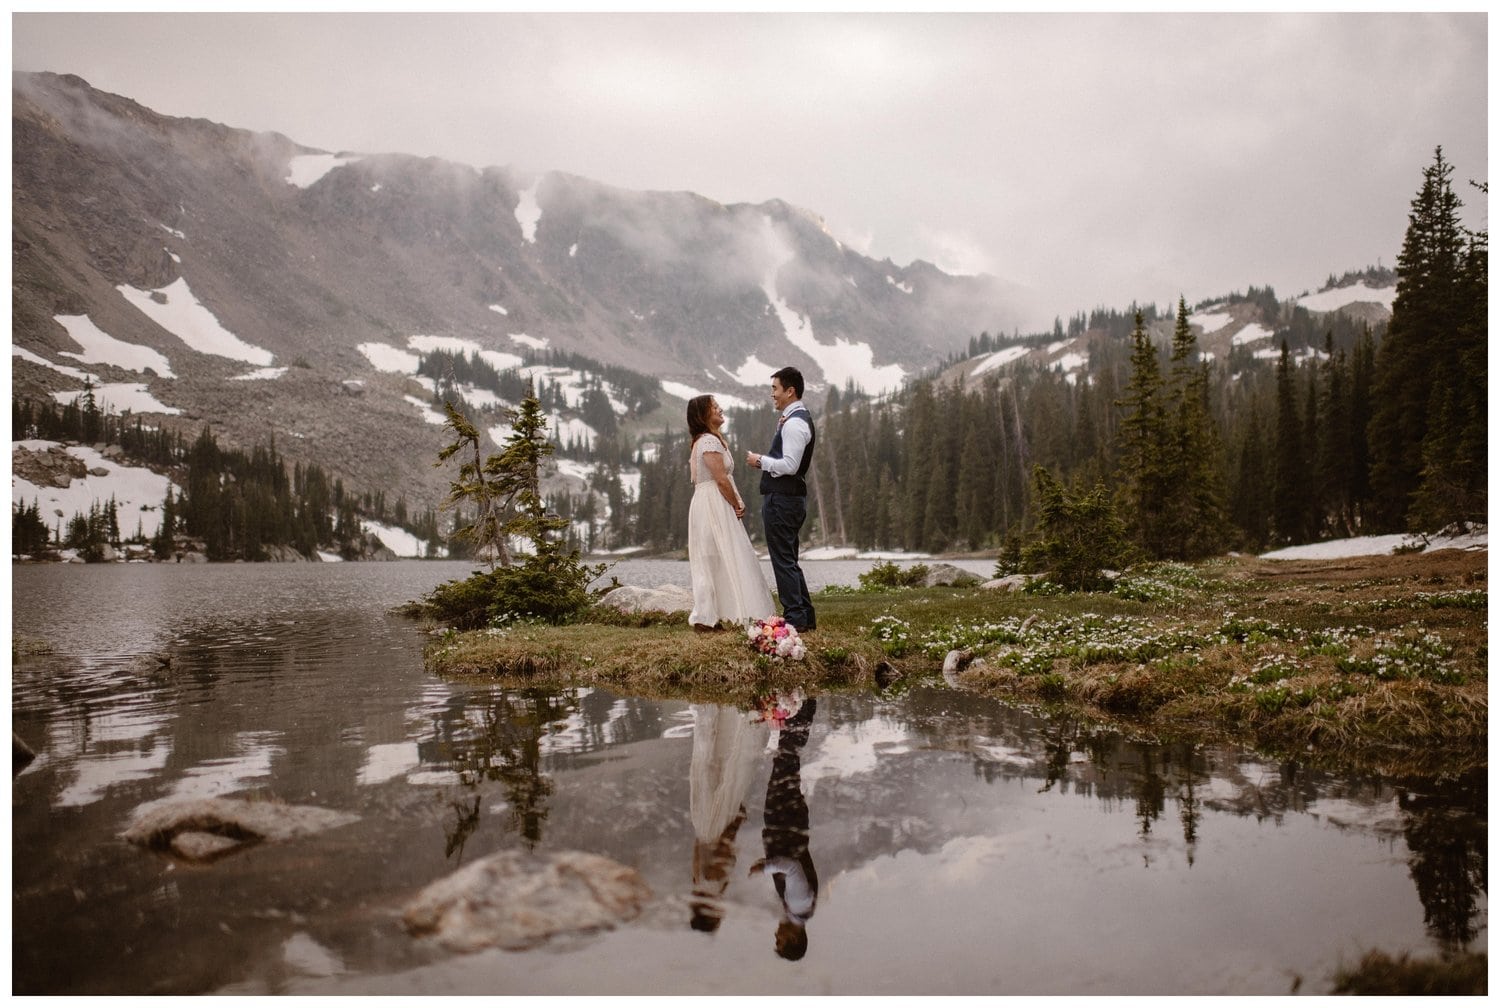 Bride and groom read their vows during intimate elopement ceremony in front of a high alpine lake, near Boulder, Colorado. There is a forest and snow-capped mountains in the background. 